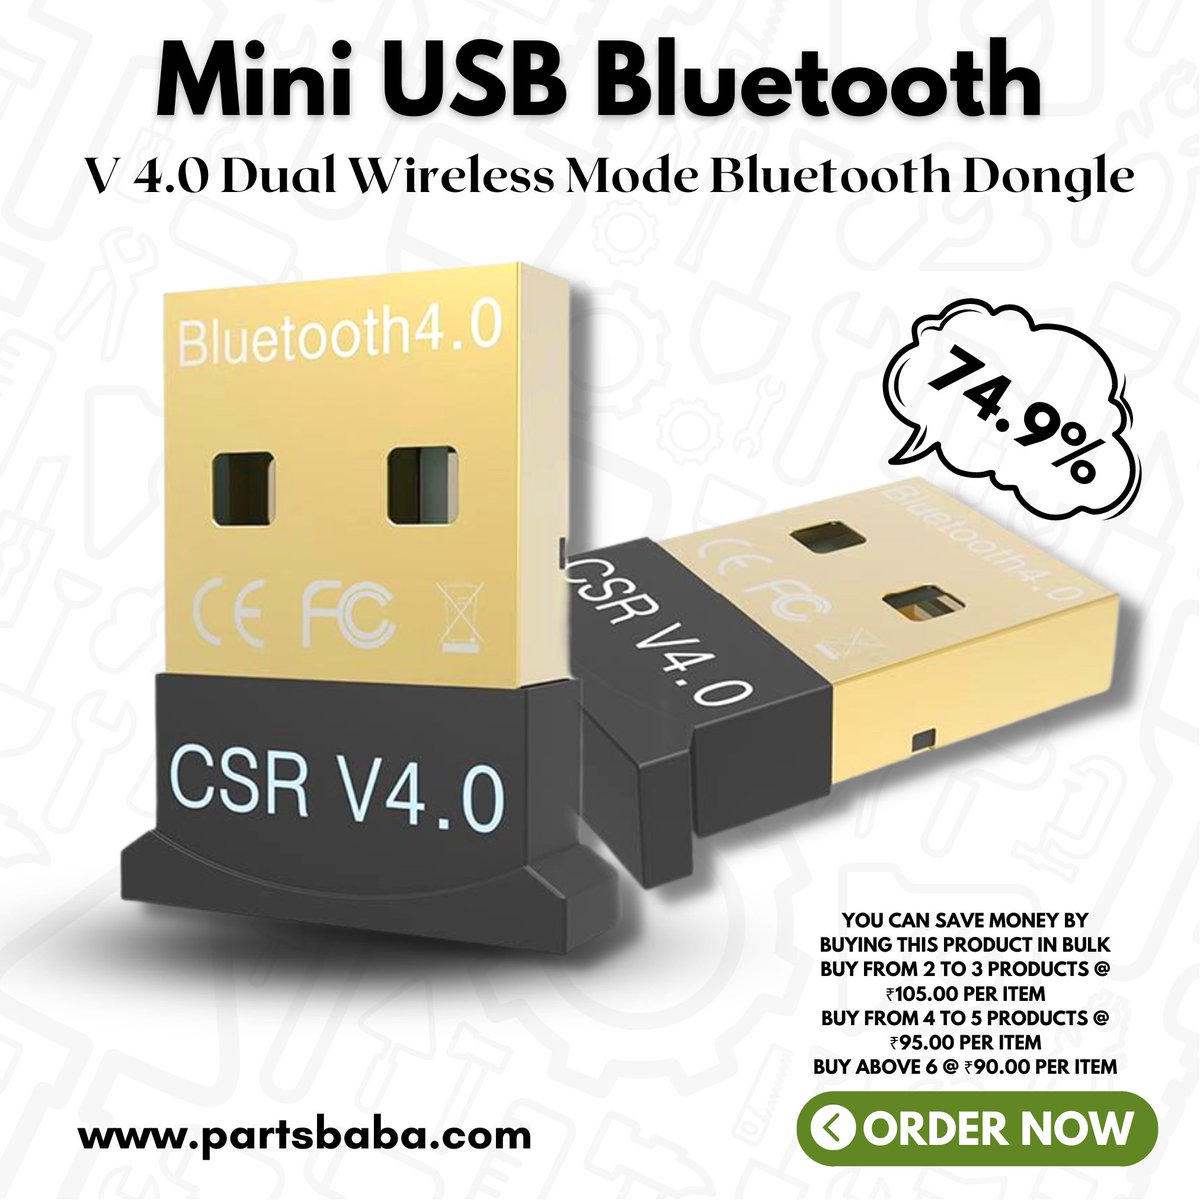 Mini USB Bluetooth
V 4.0 Dual Wireless Mode Bluetooth Dongle
Buy Now On Partsbaba.com
Buy And Get Discount / Buy Product In Bulk And Get More Discount
@Partsbaba.com

#partsbaba #bt #ysb #USBdongle #dongle #buynow #discount #bulkbuy #wireless